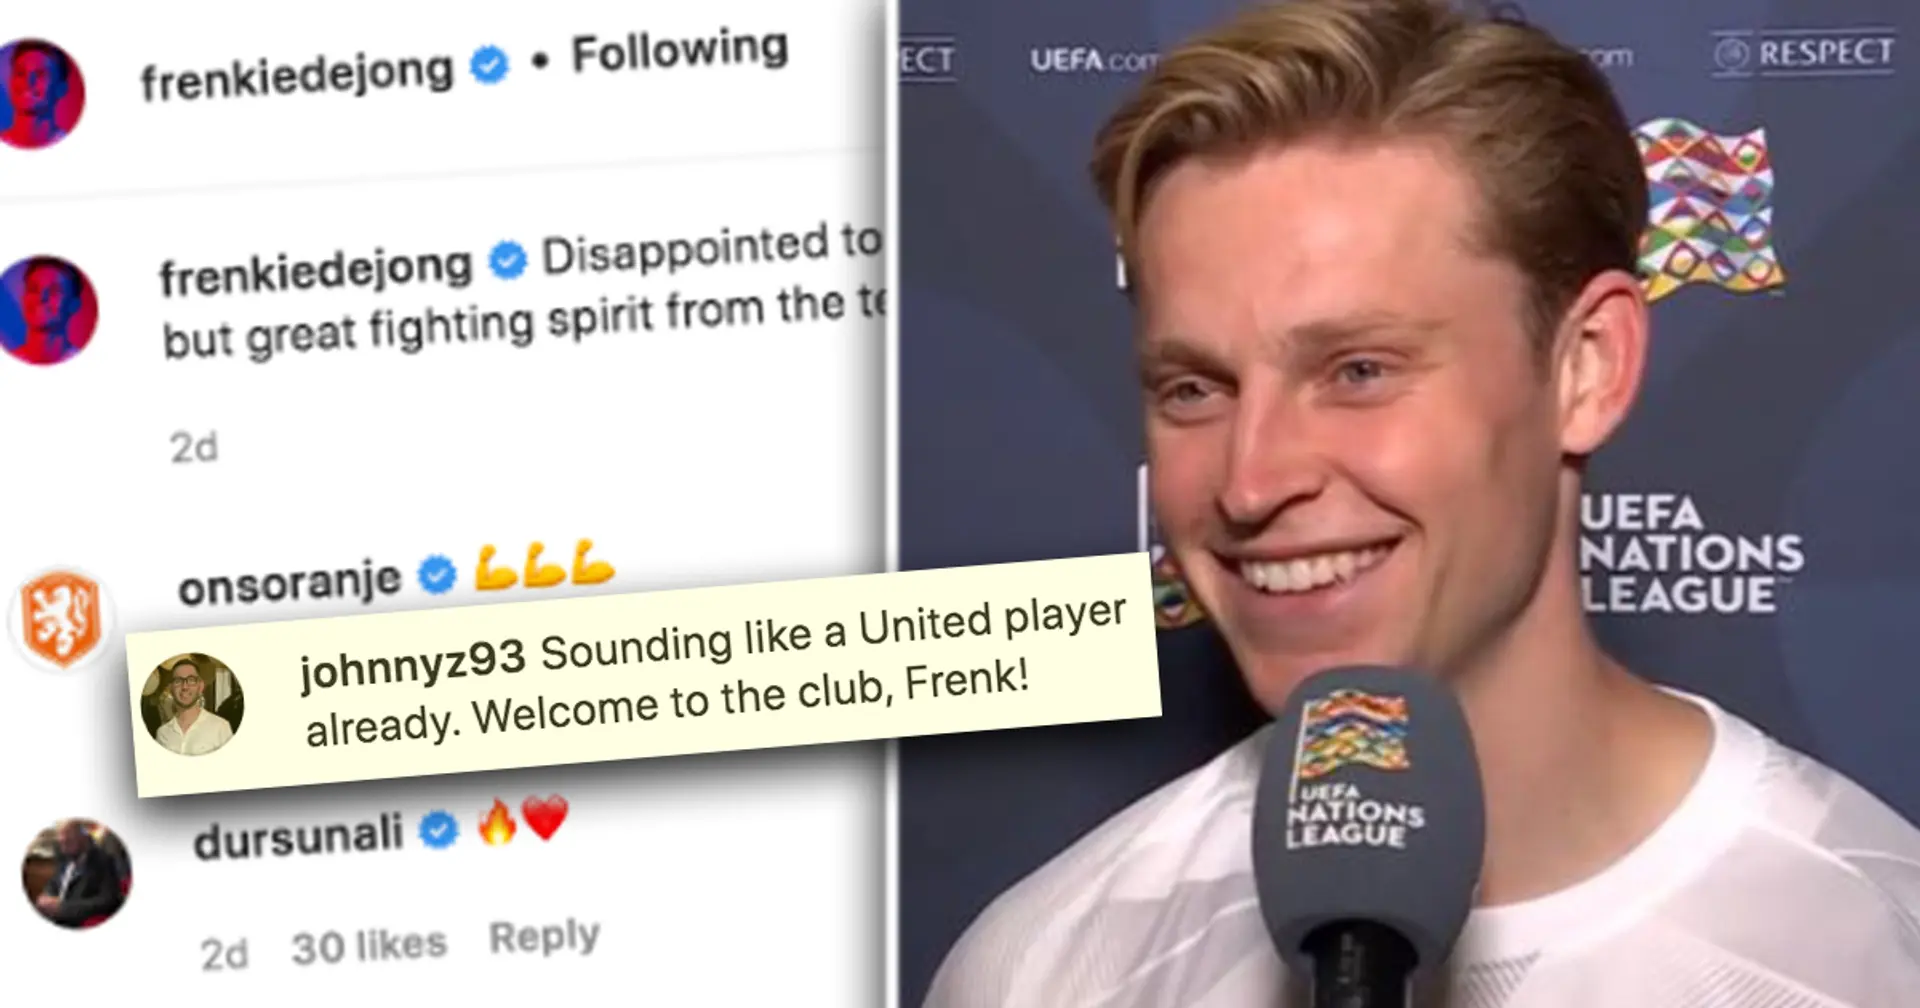 Man Utd fans use De Jong's Instagram post as 'proof' of his readiness to join them